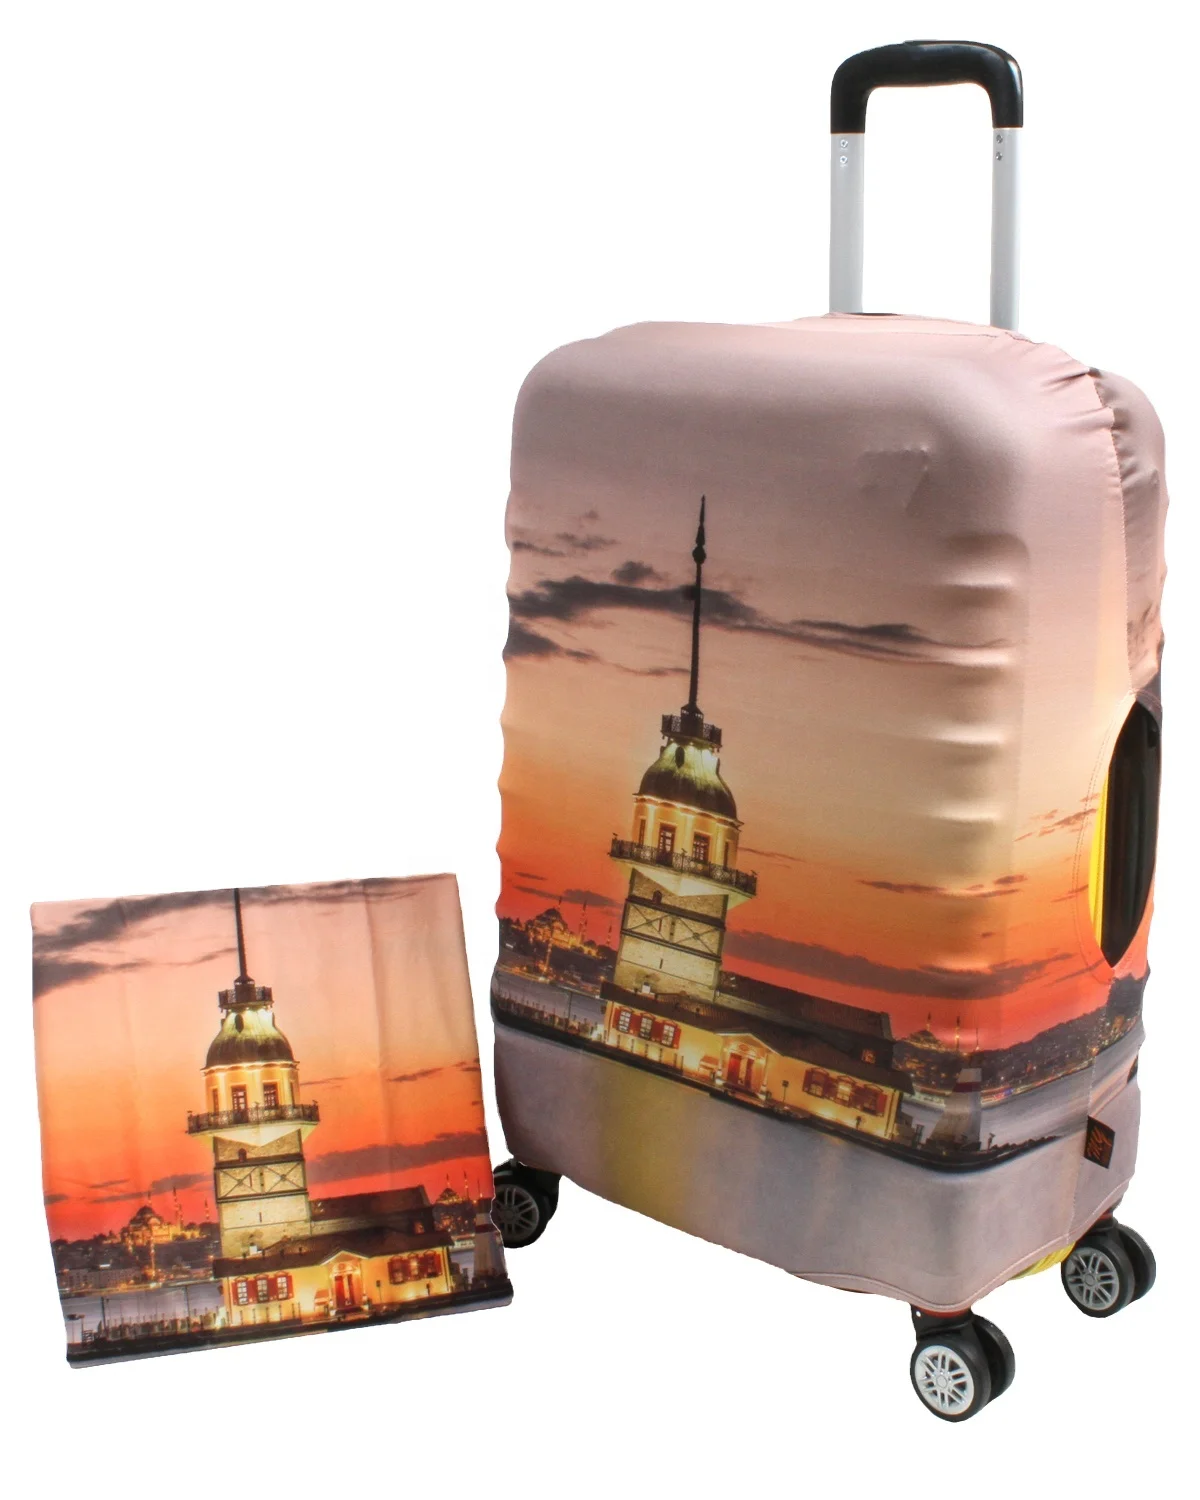 Reflectie Gluren Spookachtig Maiden's Tower Istanbul Neoprene Luggage Cover Made In Turkey Oem Suitcase  Cover Protection Valise Koffer Troler Maletas Baggage - Buy Luggage Cover  Trolley Cover Suitcase Cover Troler Valise Koffer Maletas Bagaglio Baggage